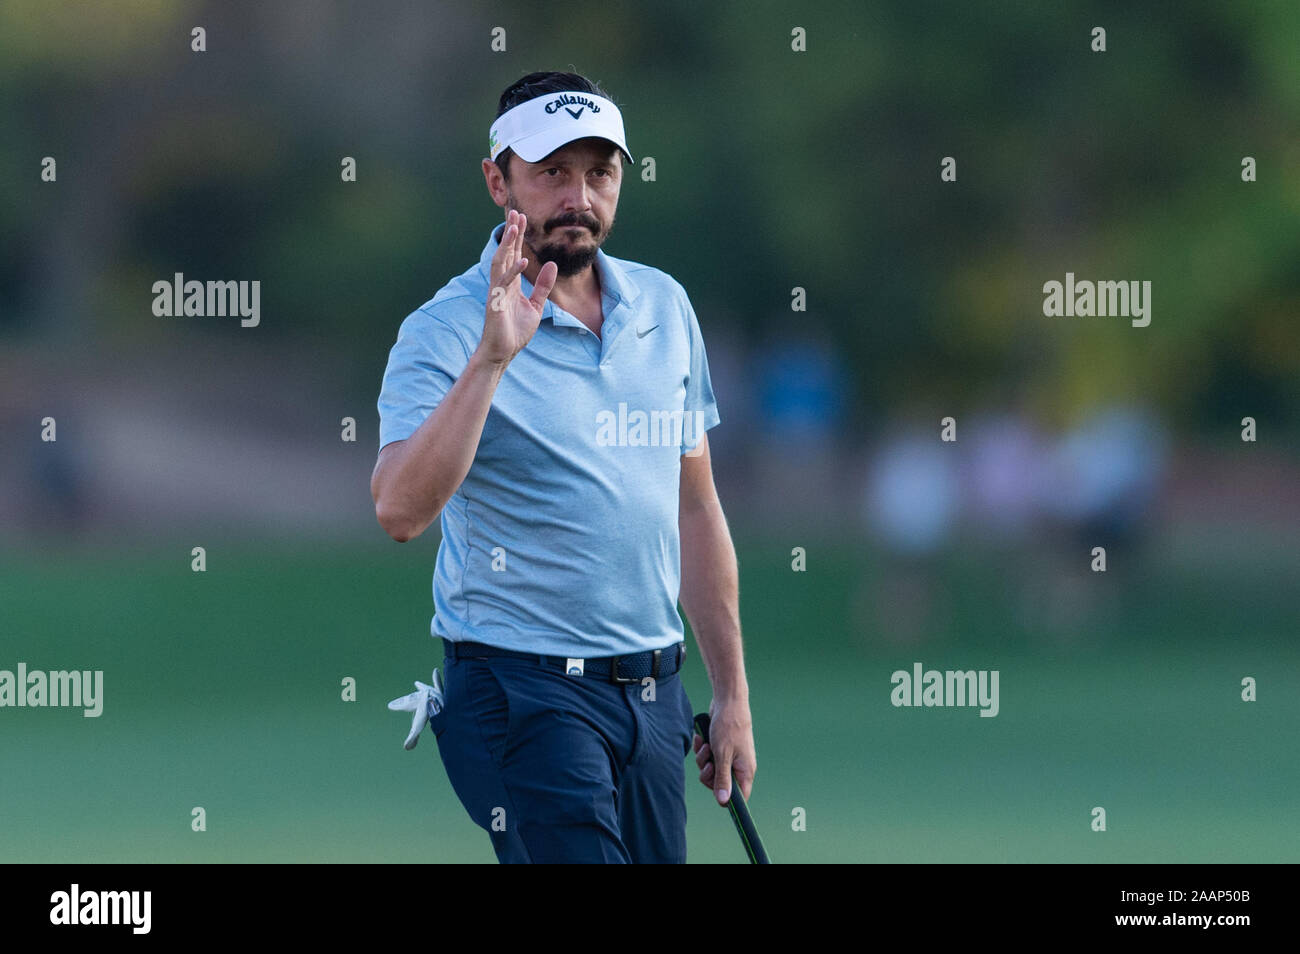 Jumeirah Golf Estates, Dubai, UAE. 23rd Nov 2019. Mike Lorenzo-Vera of  France acknowledges the crowd after his third round during the DP World  Tour Championship at Jumeirah Golf Estates, Dubai, UAE on